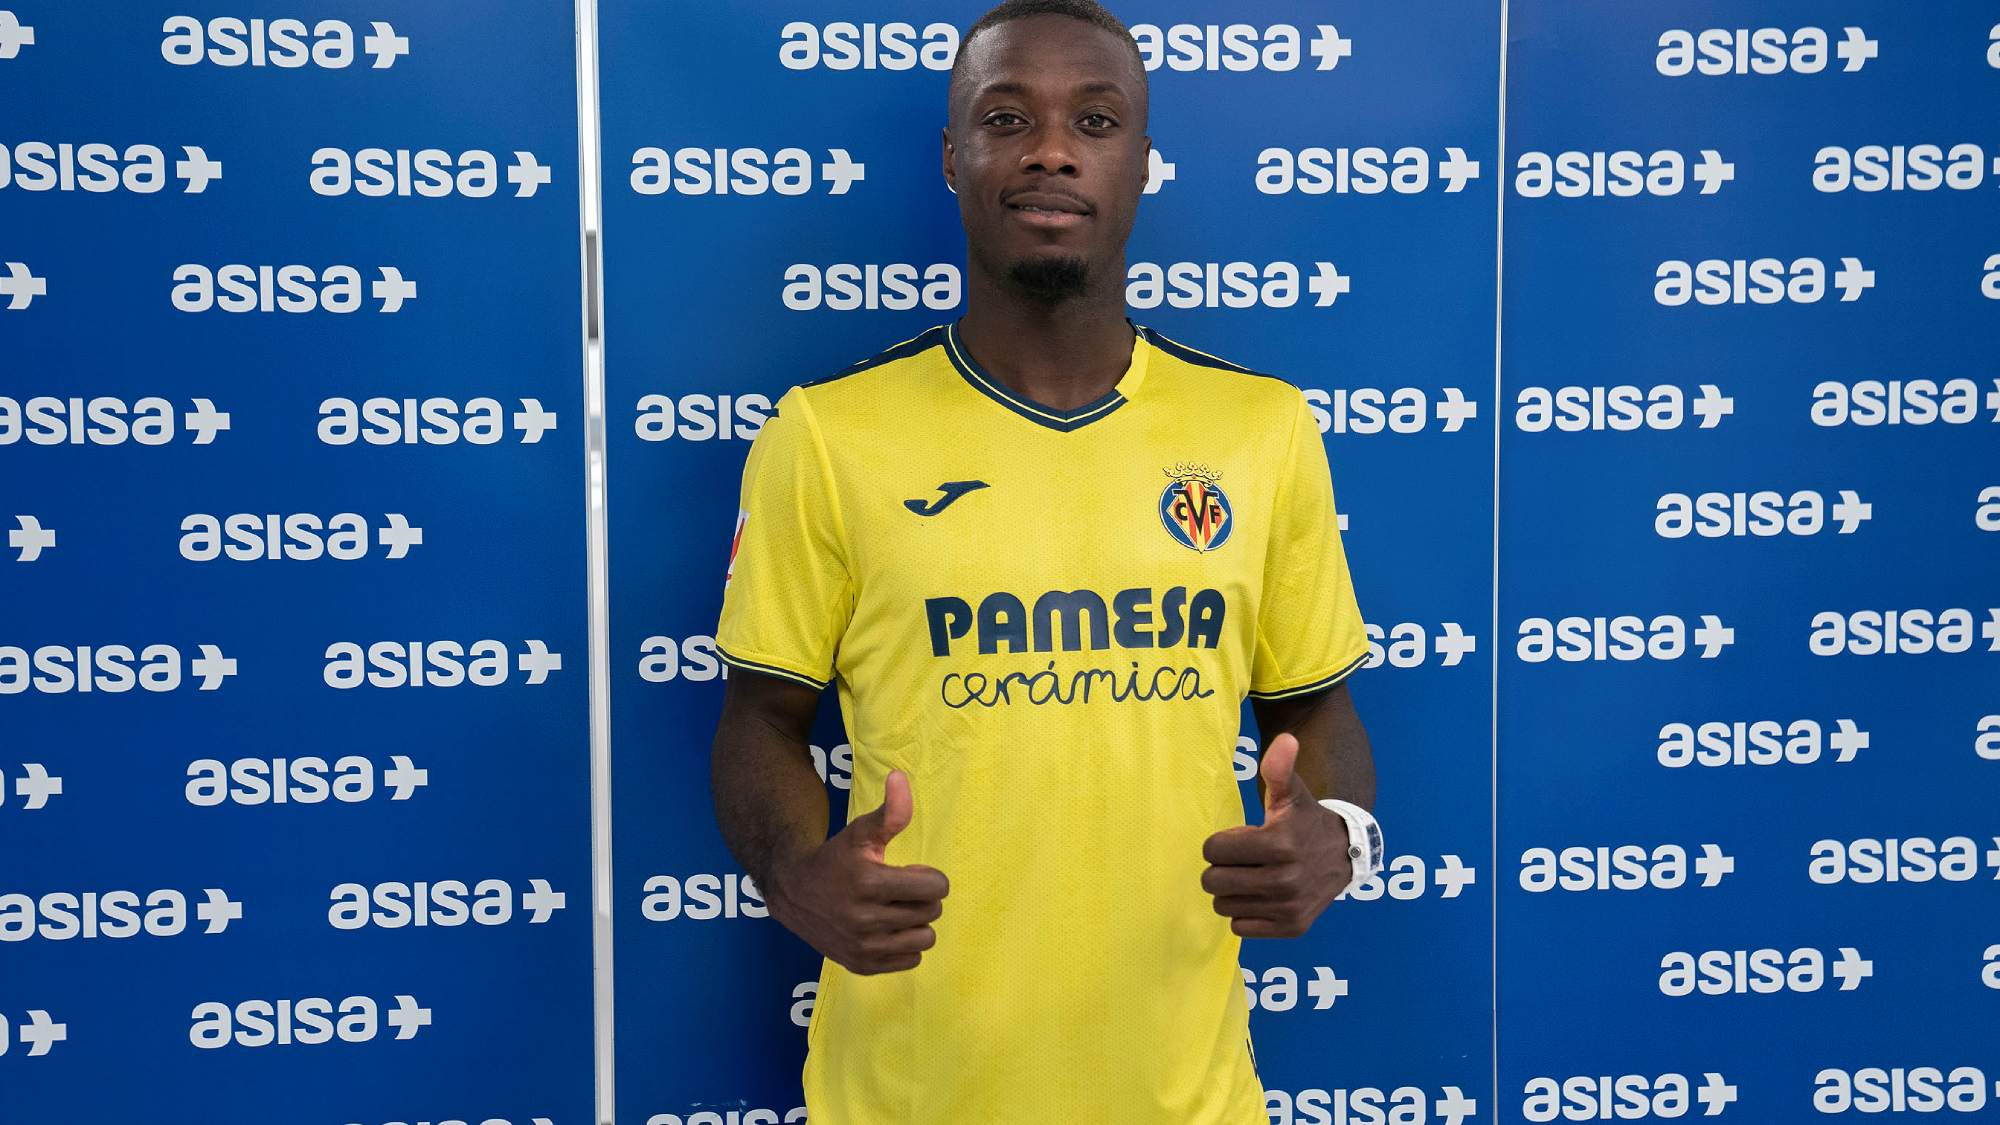 Former Arsenal forward, Nicolas Pepe joins Villarreal on two-year contract